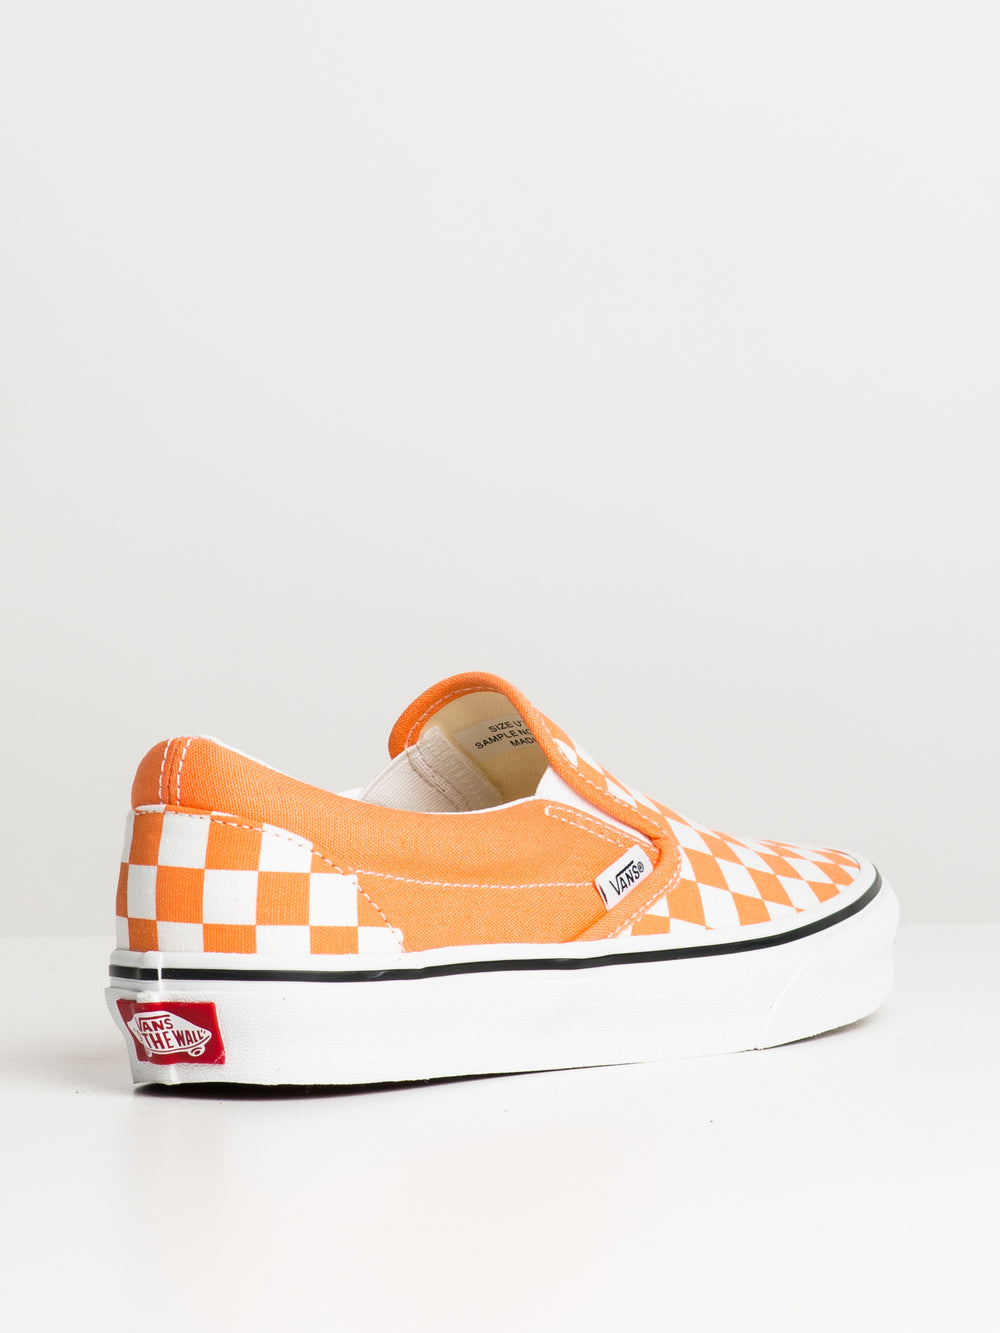 WOMENS VANS CL SLIP-ON CHECK  - CLEARANCE